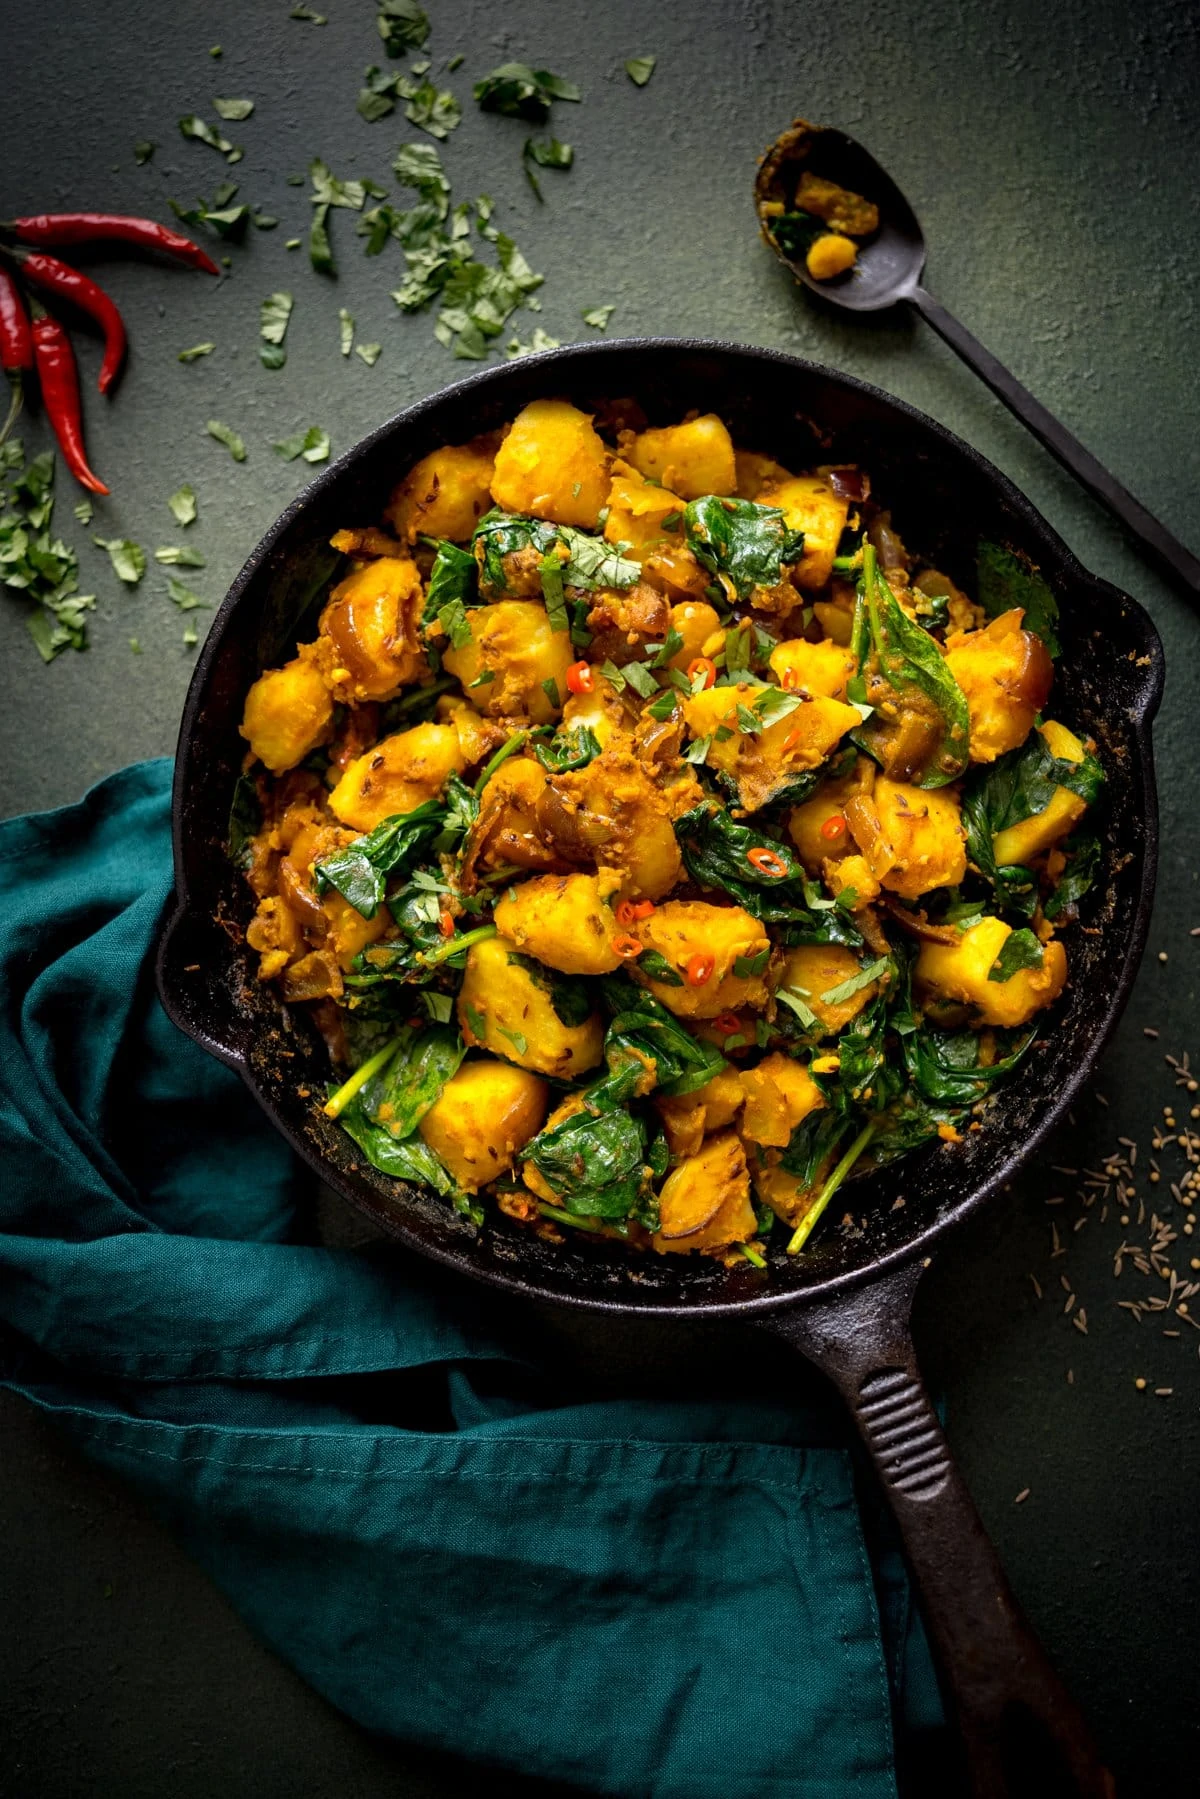 saag aloo in a cast iron pan on a dark green background/ Green napkin, a black spoon and garnishes surround the pan.